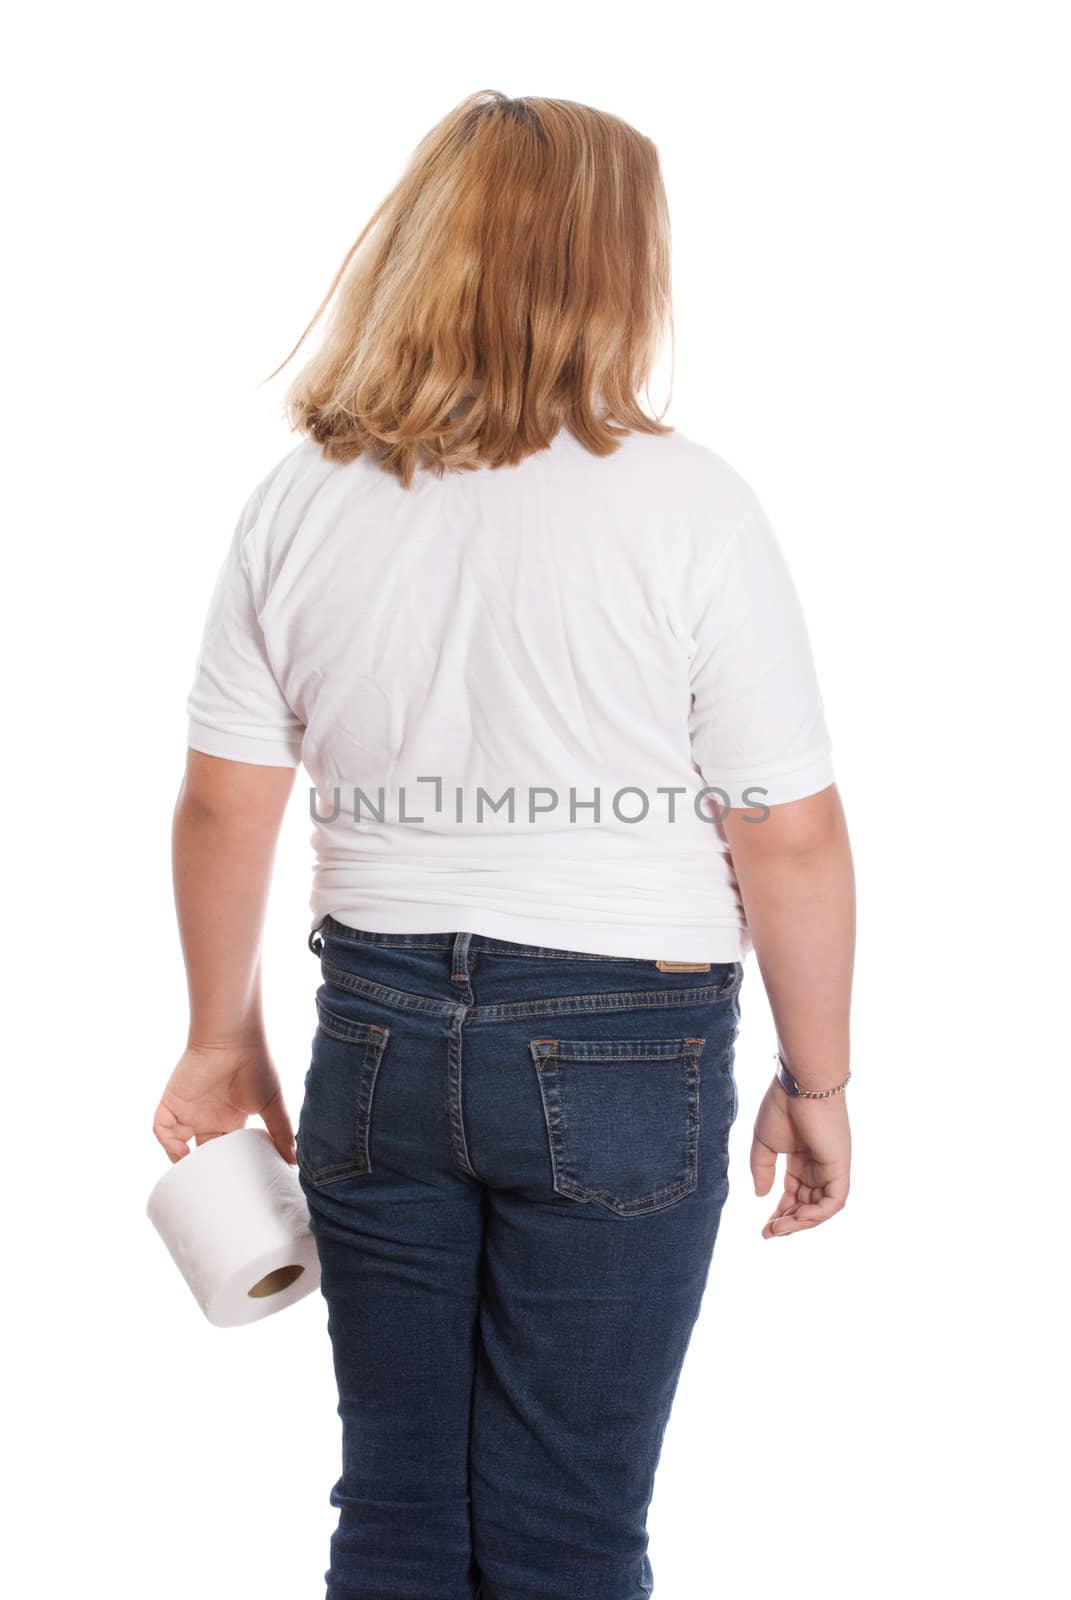 A young girl holding the toilet paper and walking away from the camera, isolated against a white background